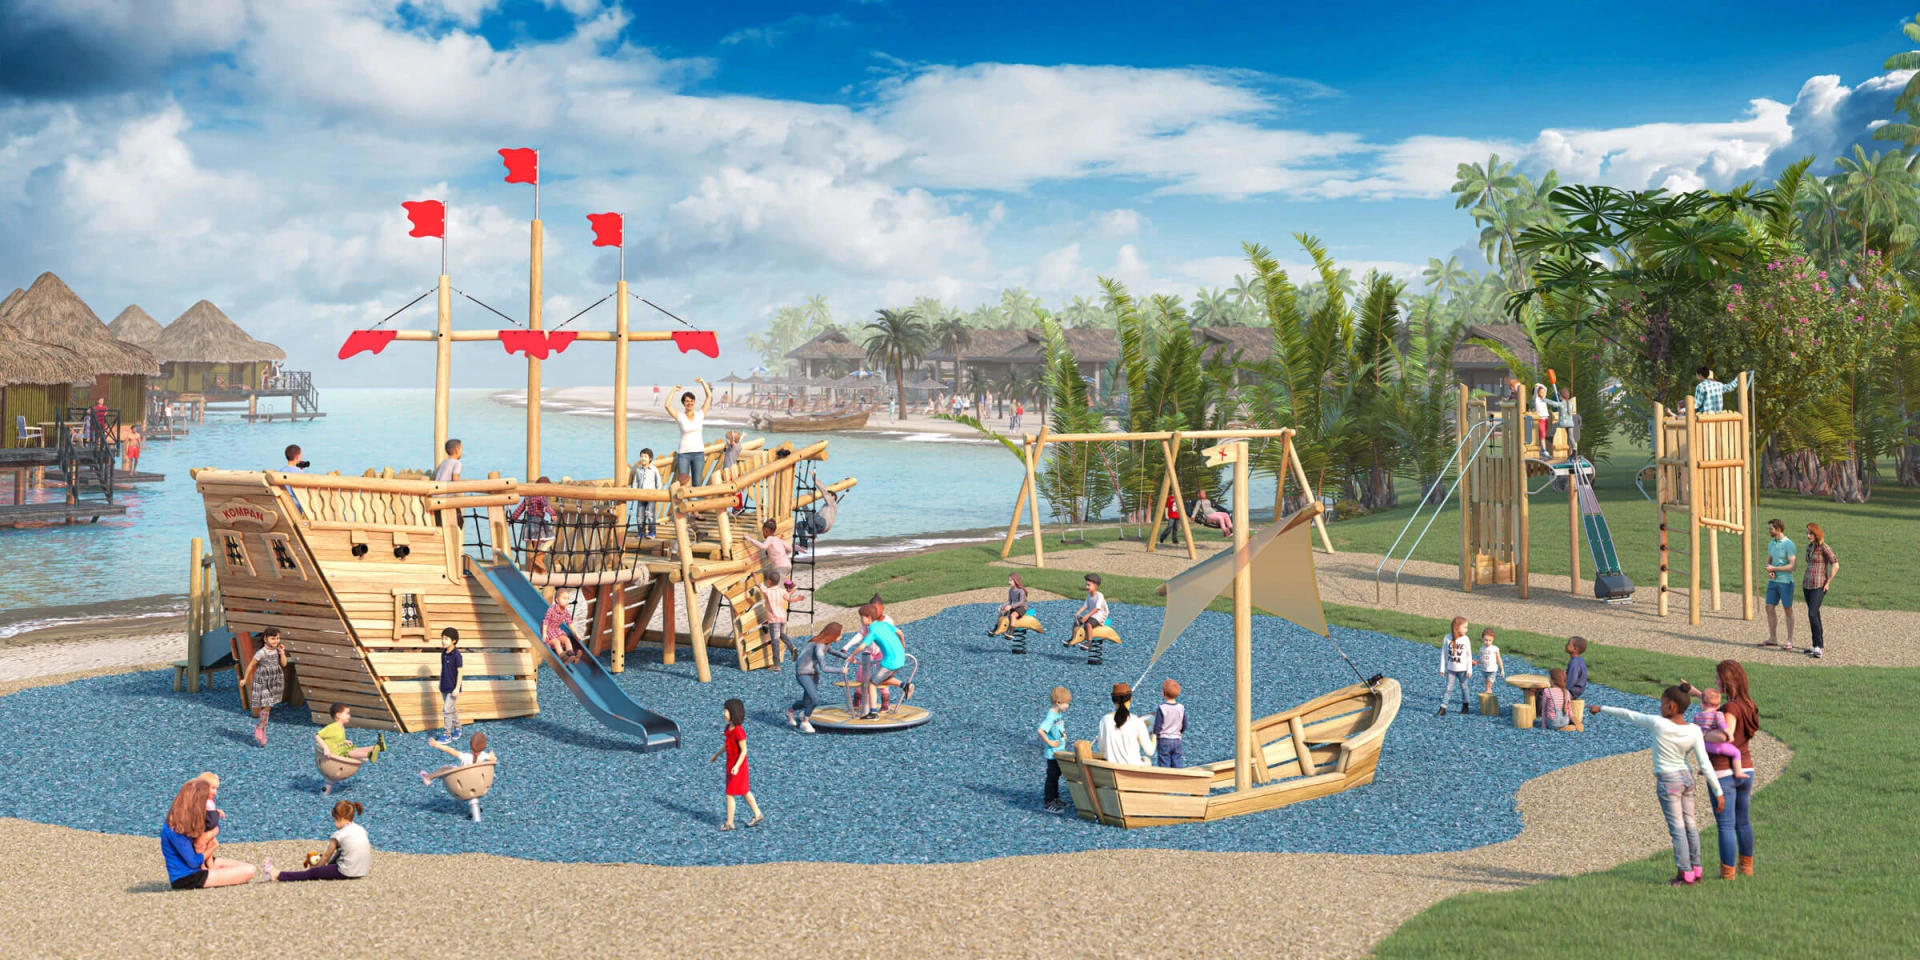 Design idea of a pirate themed wooden playground near the sea